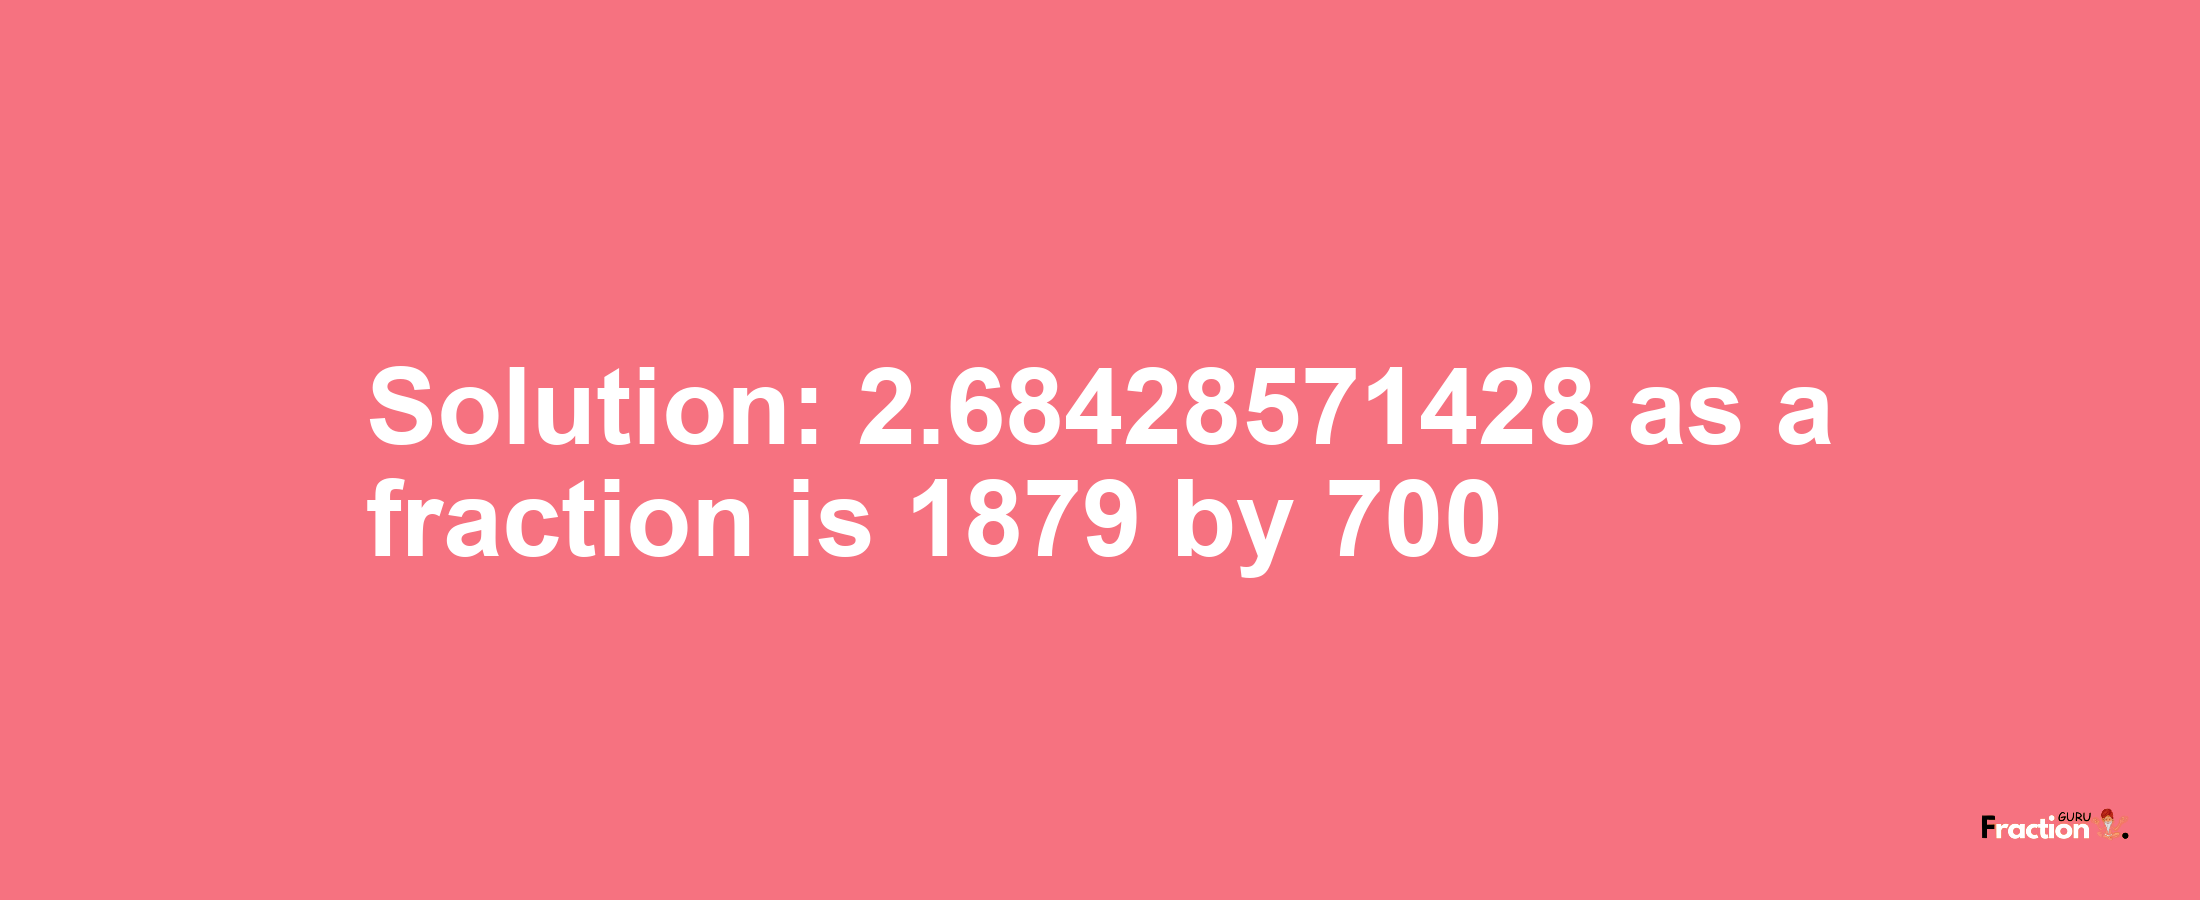 Solution:2.68428571428 as a fraction is 1879/700